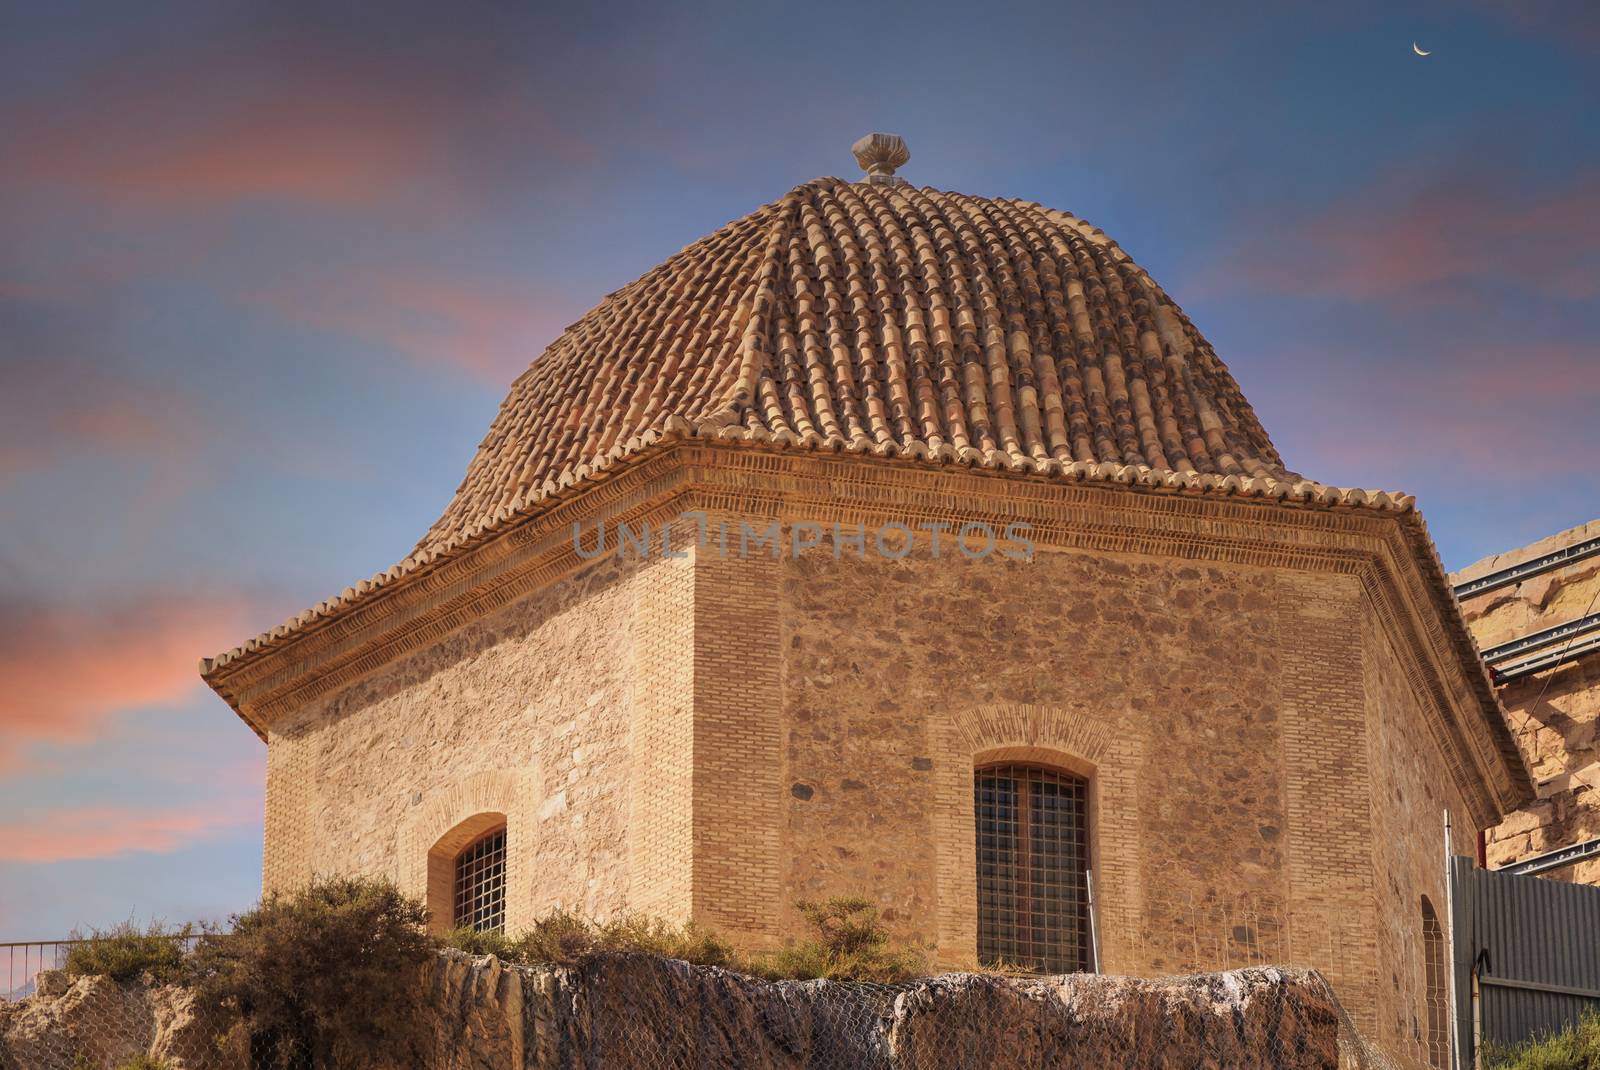 Tiled Dome Roof at Dusk by dbvirago